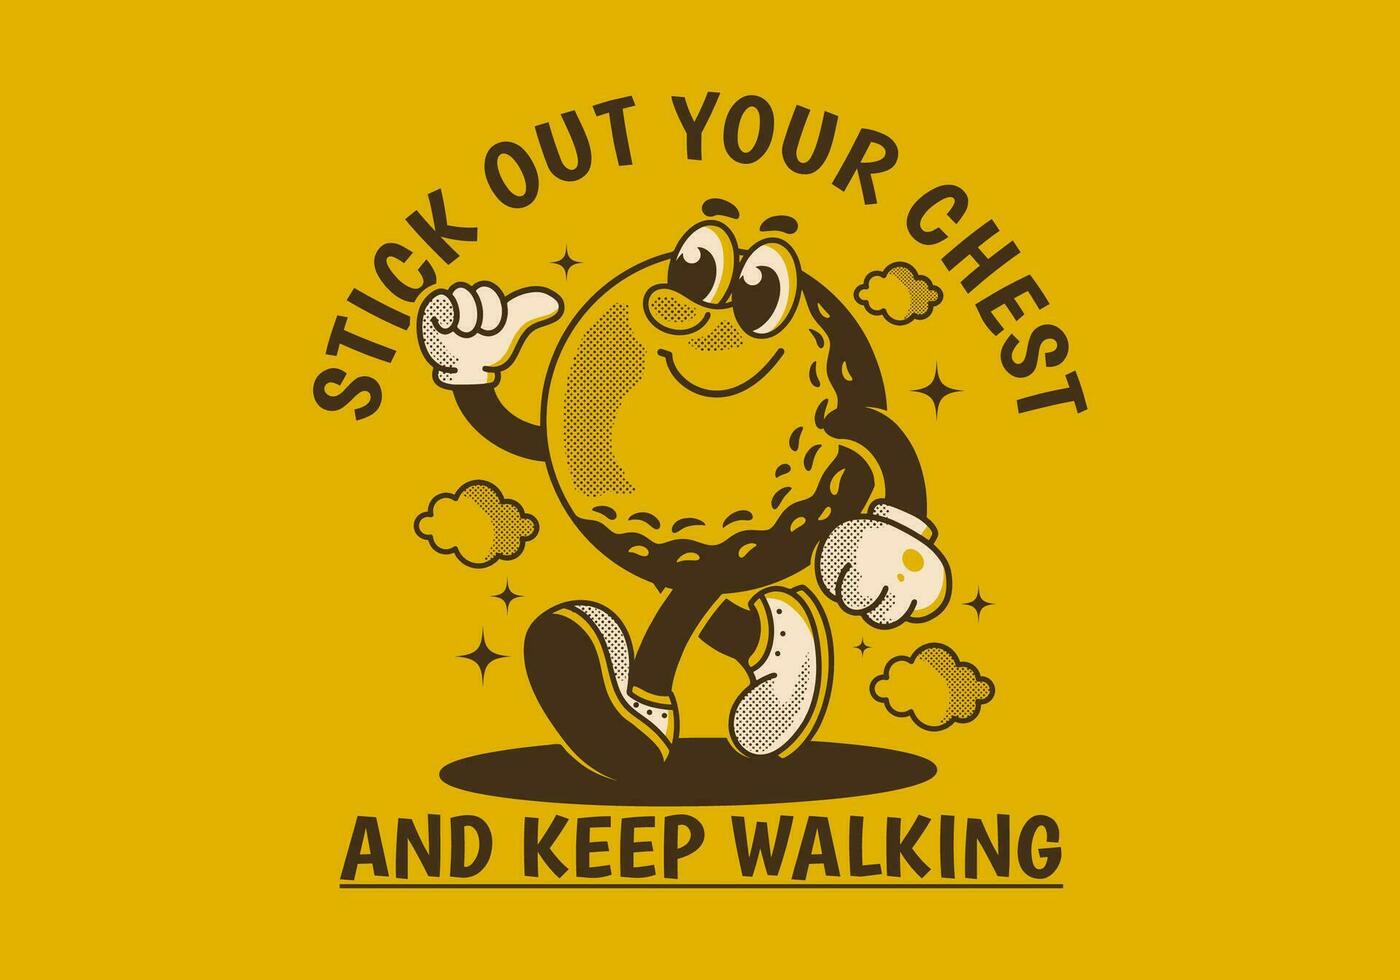 Stick out your chest and keep walking. Mascot character design of walking golf ball vector